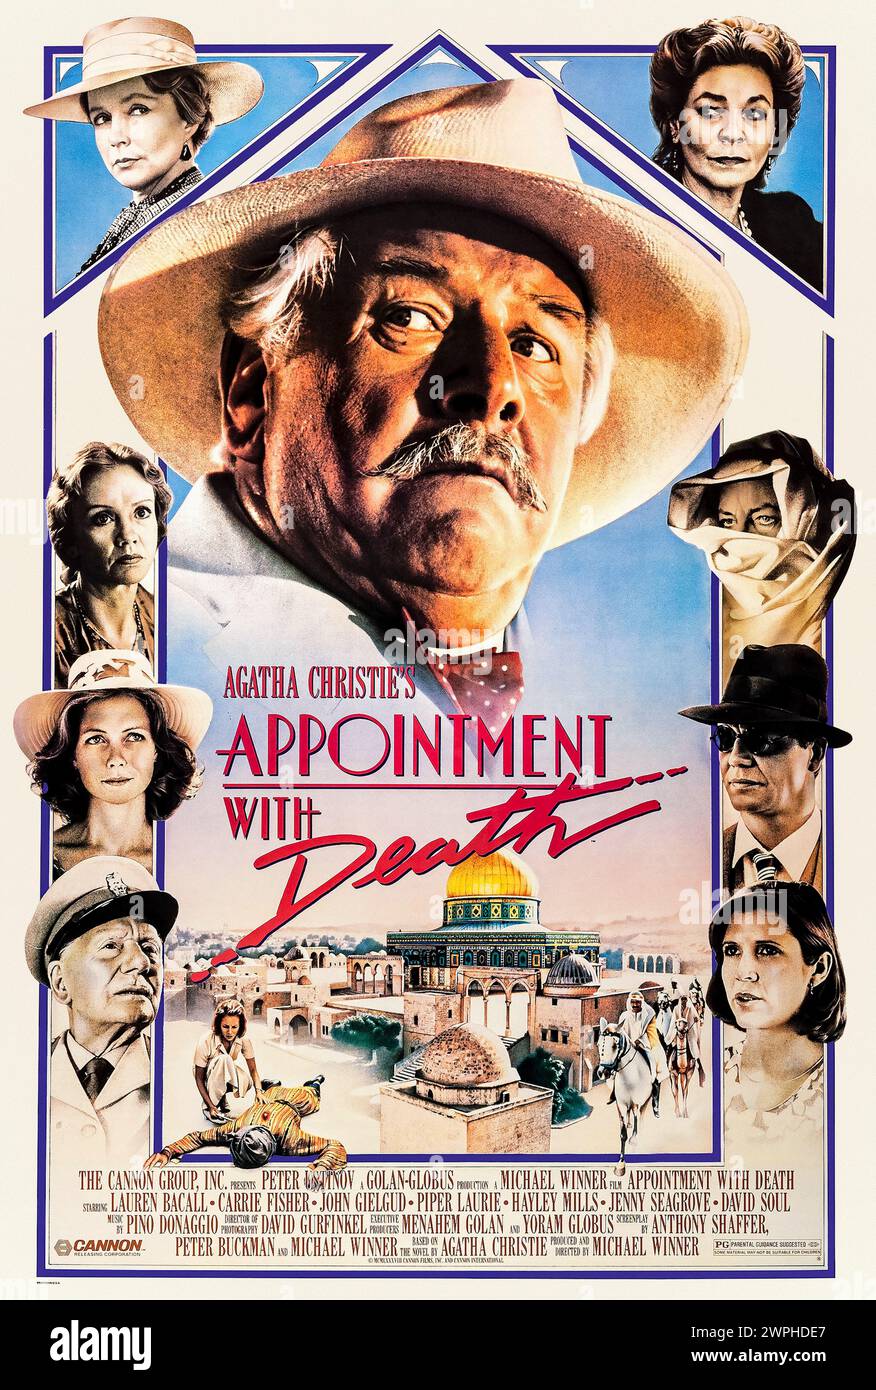 Appointment with Death (1988) directed by Michael Winner and starring Peter Ustinov, Lauren Bacall, Carrie Fisher, John Gielgud, Hayley Mills and Jenny Seagrove. All star cast in an adaptation of Agatha Christie's crime novel about Poirot's holiday in the Middle East and the inevitable murder along the way! Photograph of an original 1988 US one sheet poster. ***EDITORIAL USE ONLY*** Credit: BFA / Cannon Film Distributors Stock Photo